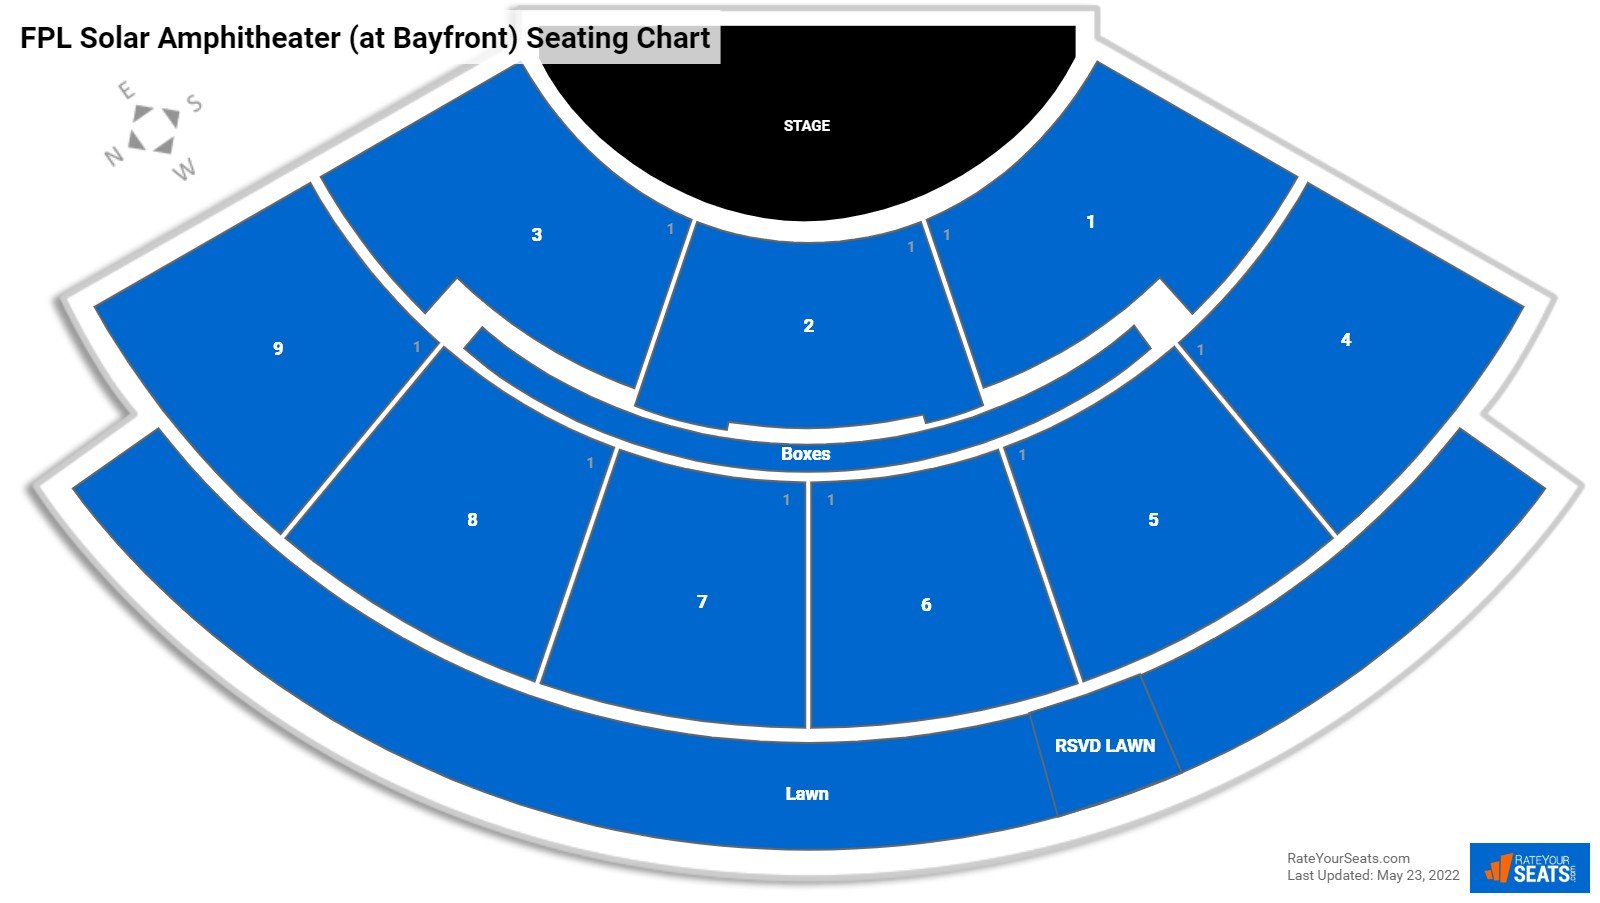 FPL Solar Amphitheater (at Bayfront) Concert Seating Chart